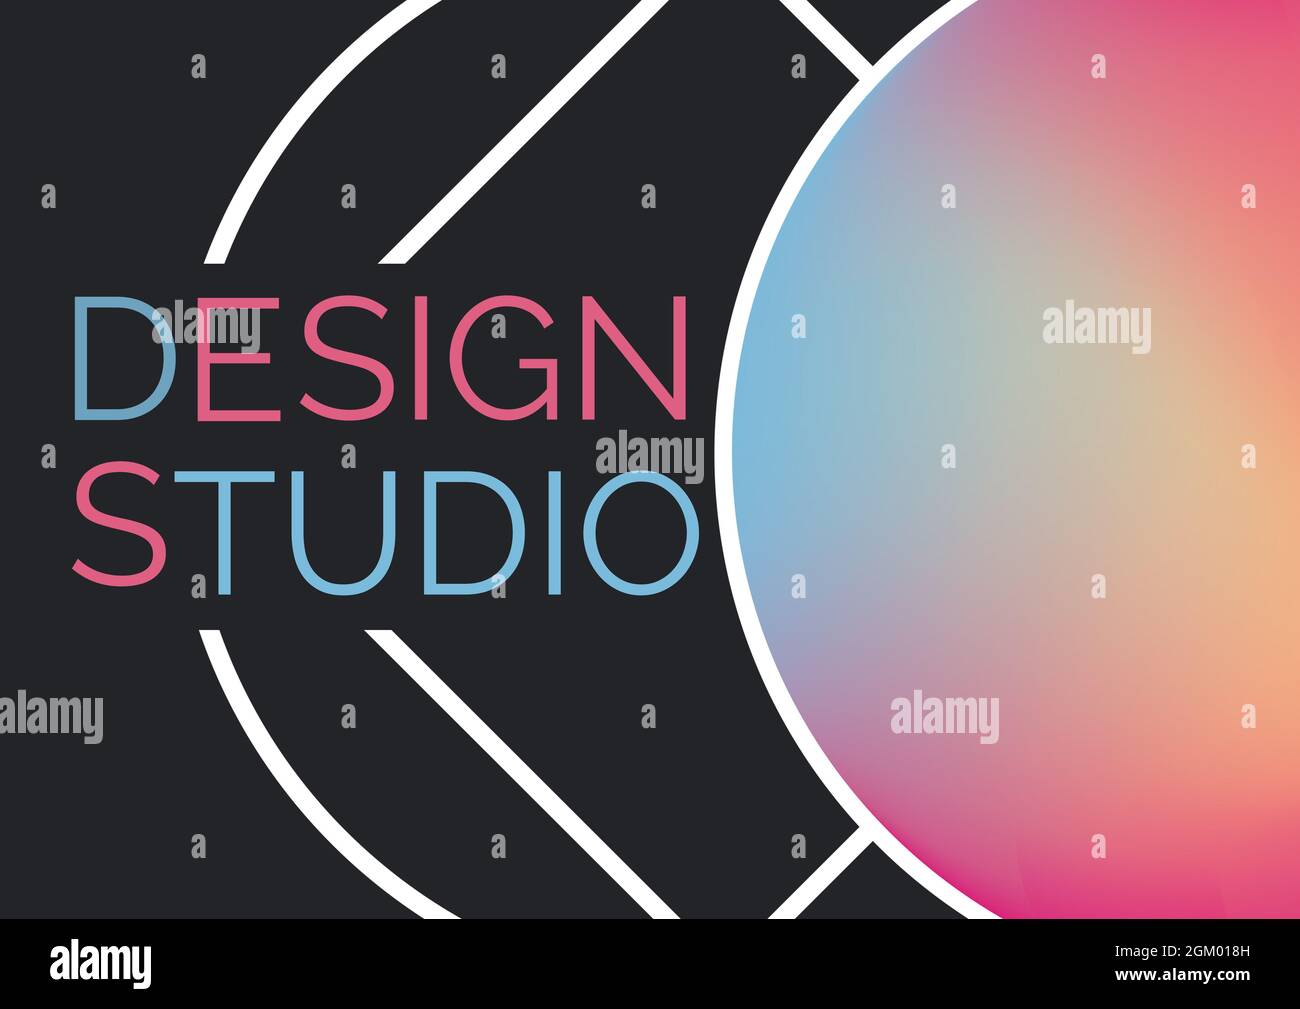 Digitally generated image of design studio text banner against abstract shapes on black background Stock Photo